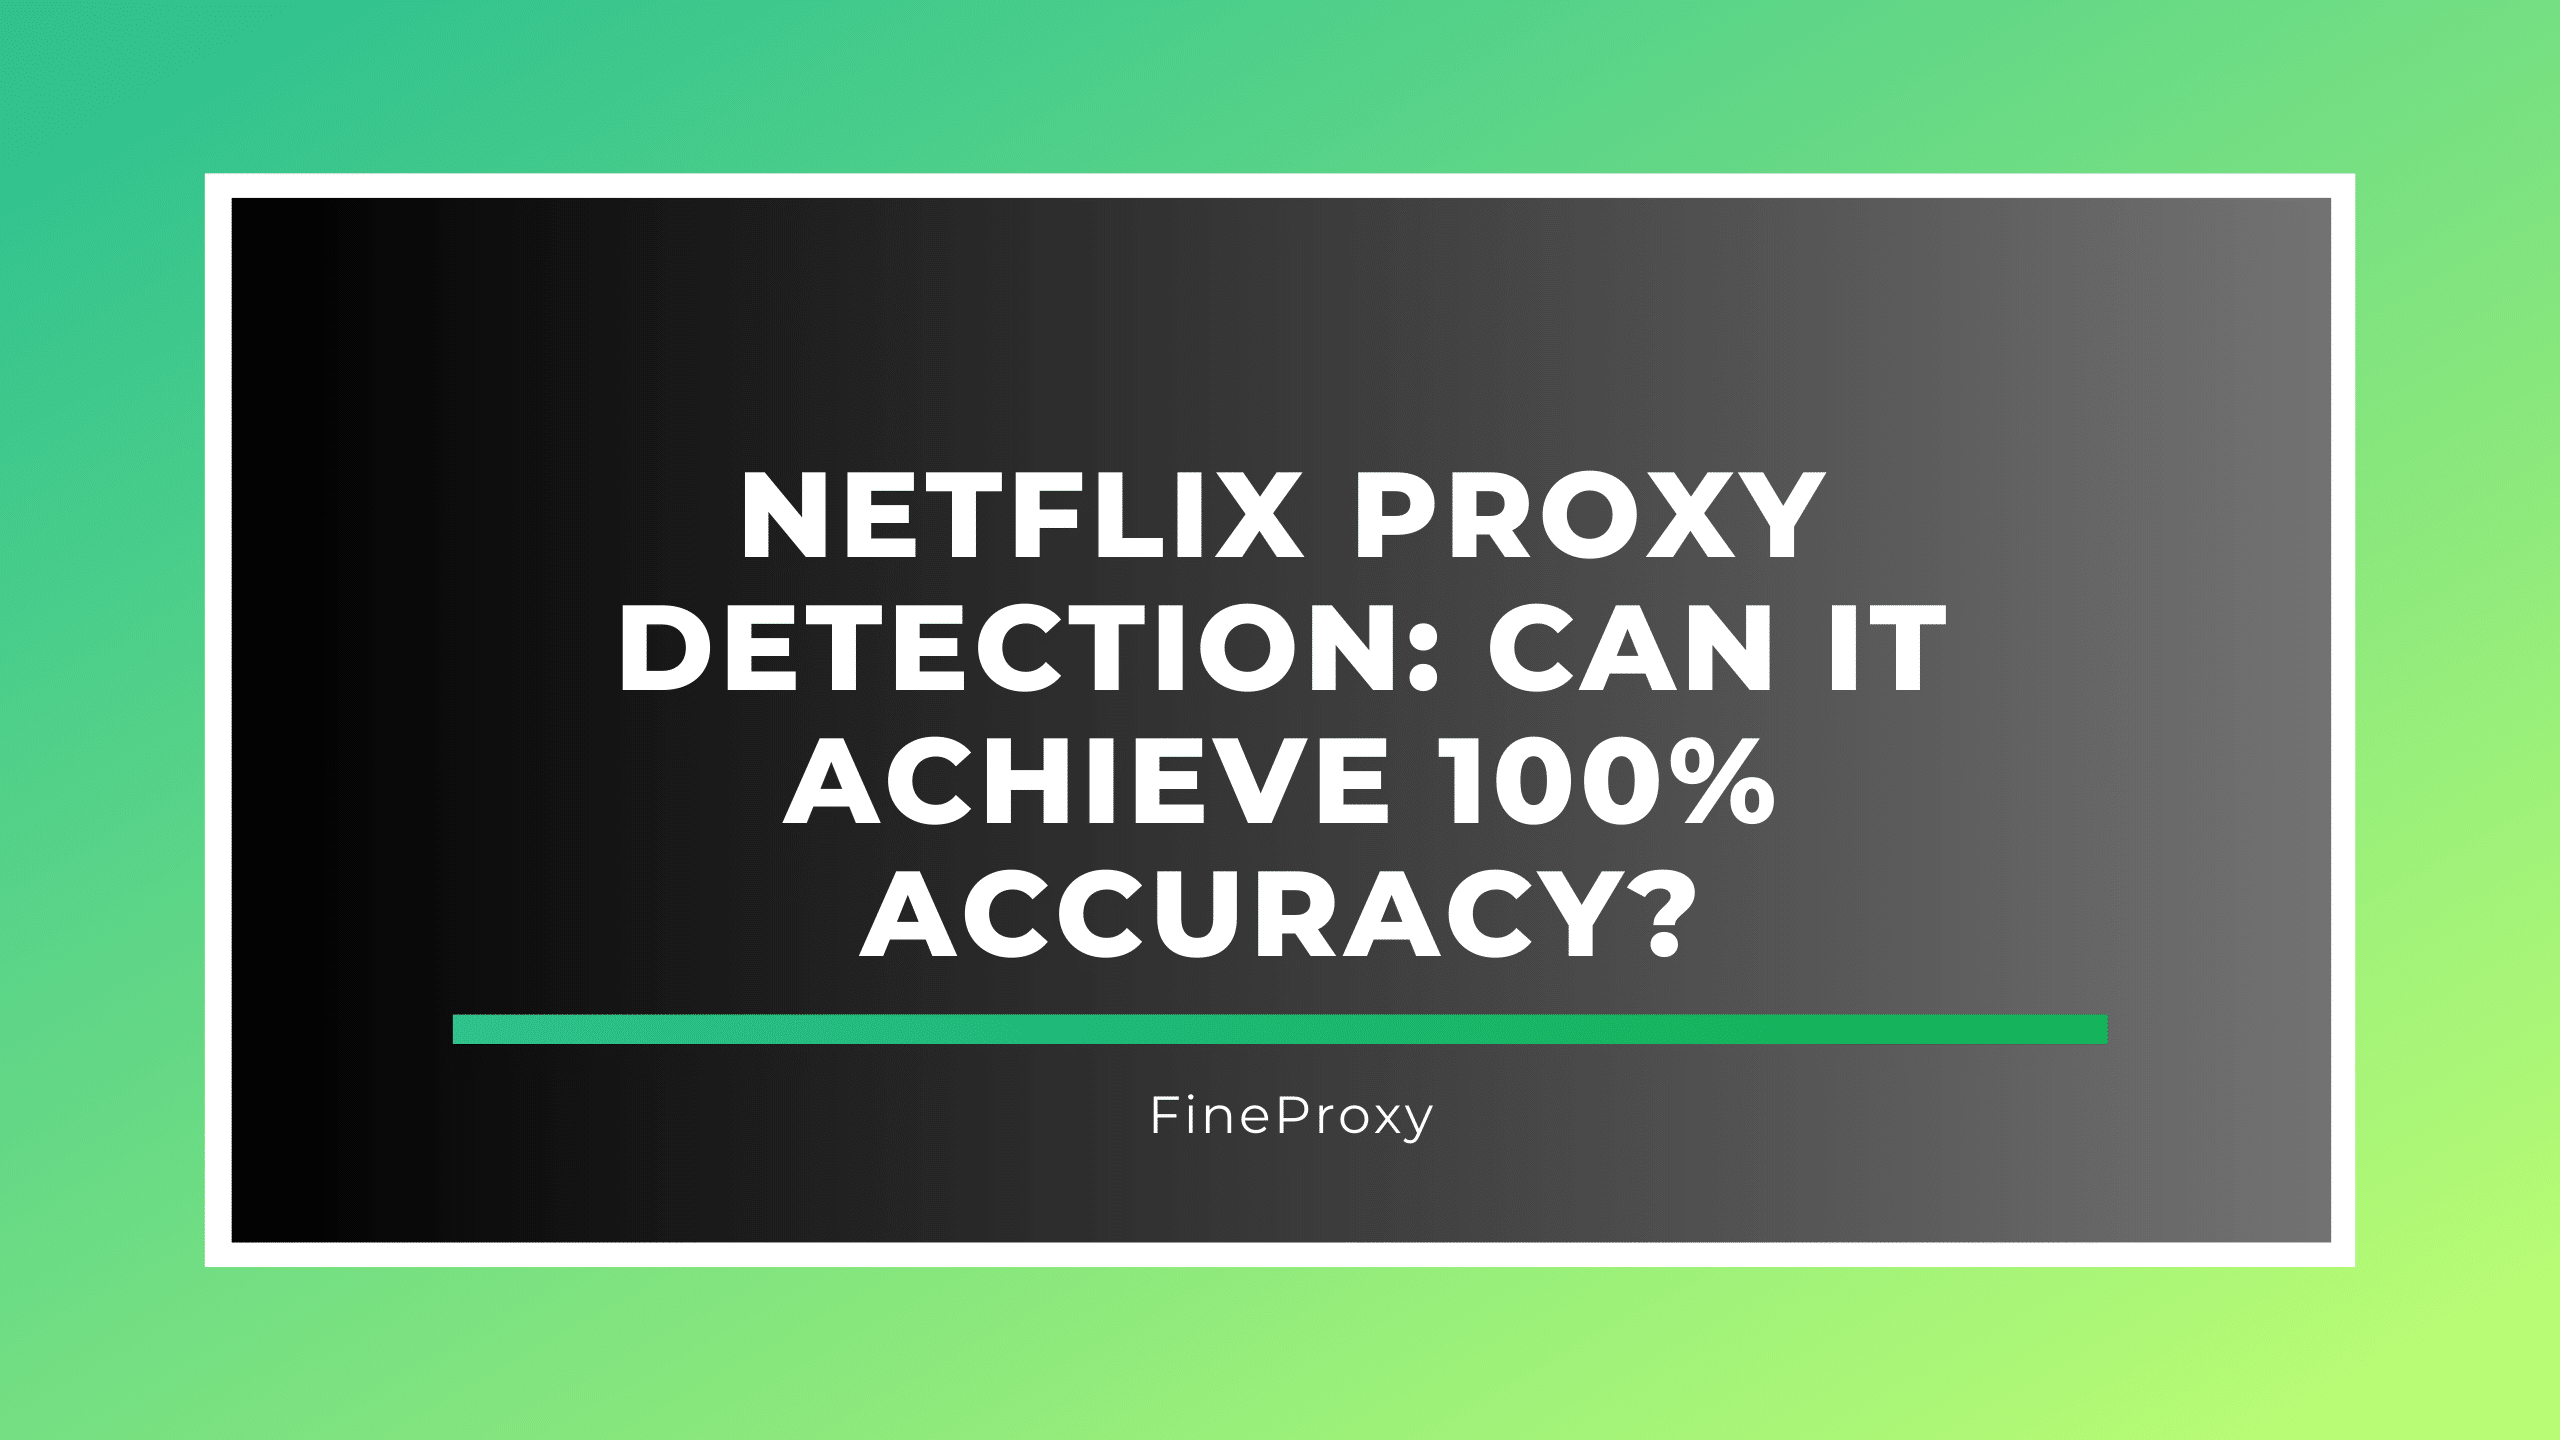 Netflix Proxy Detection: Can It Achieve 100% Accuracy?